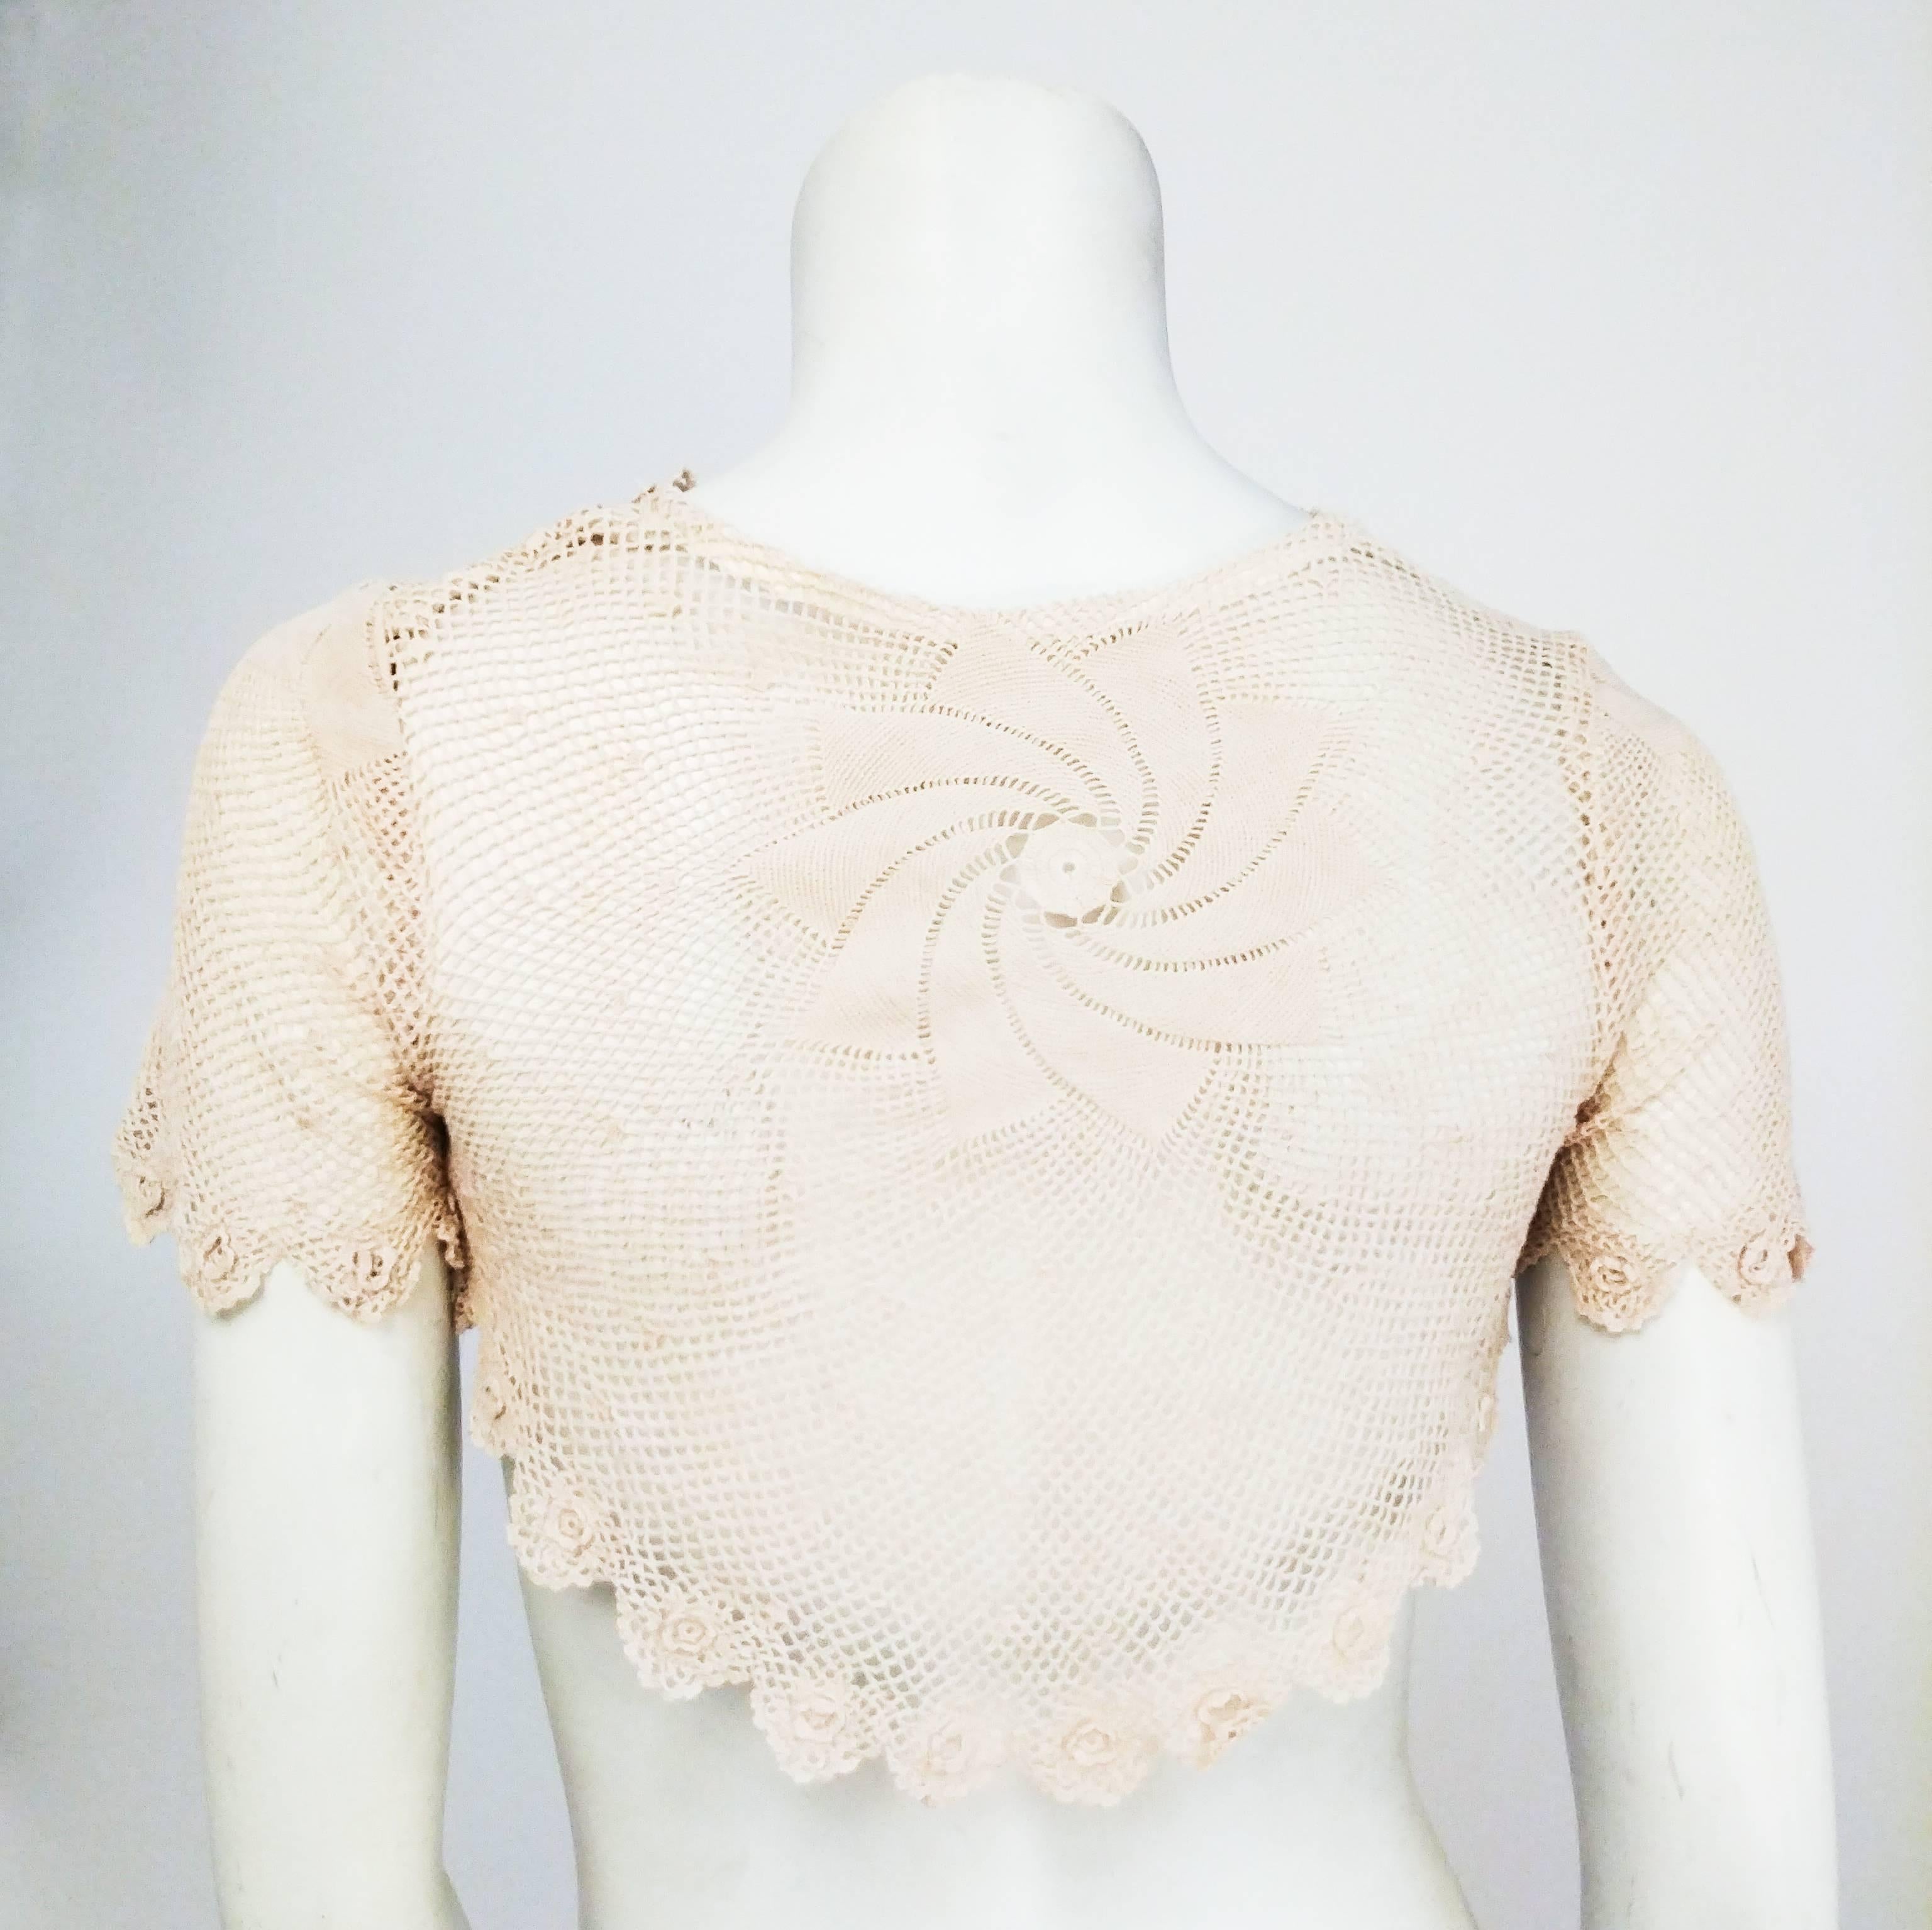 1930s Crochet Lace Bolero. Fits over shoulders, spiral detail at back. 